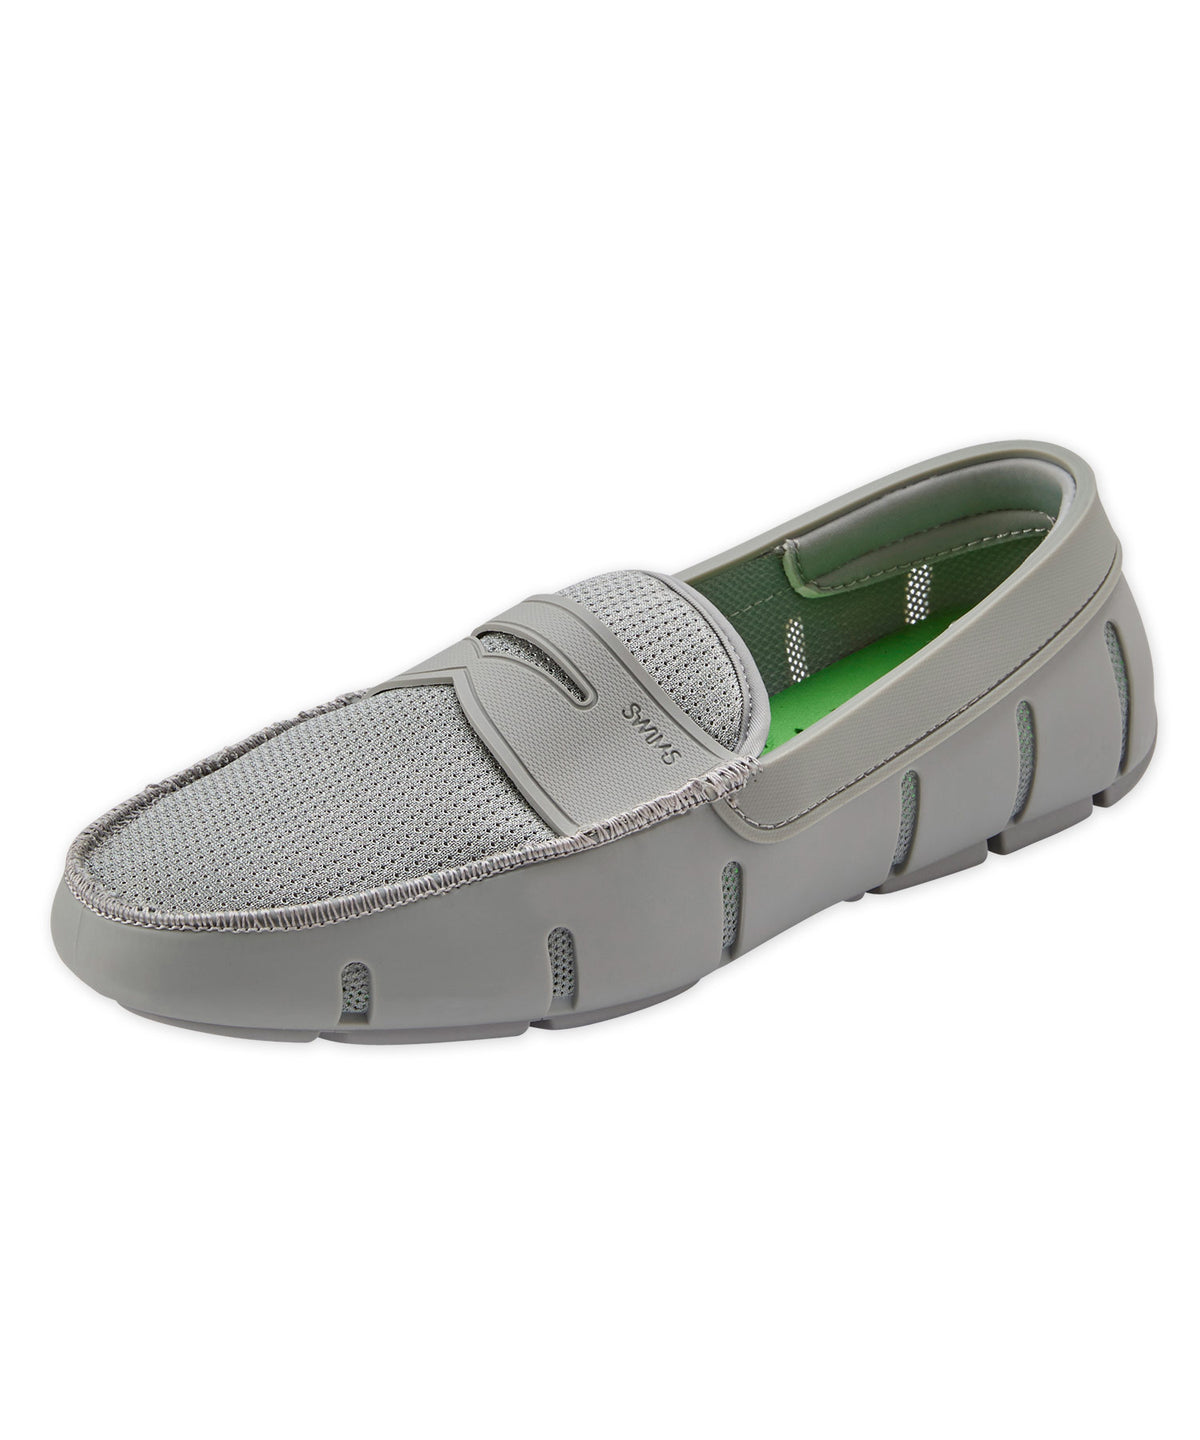 Swims Water-Resistant Penny Loafers